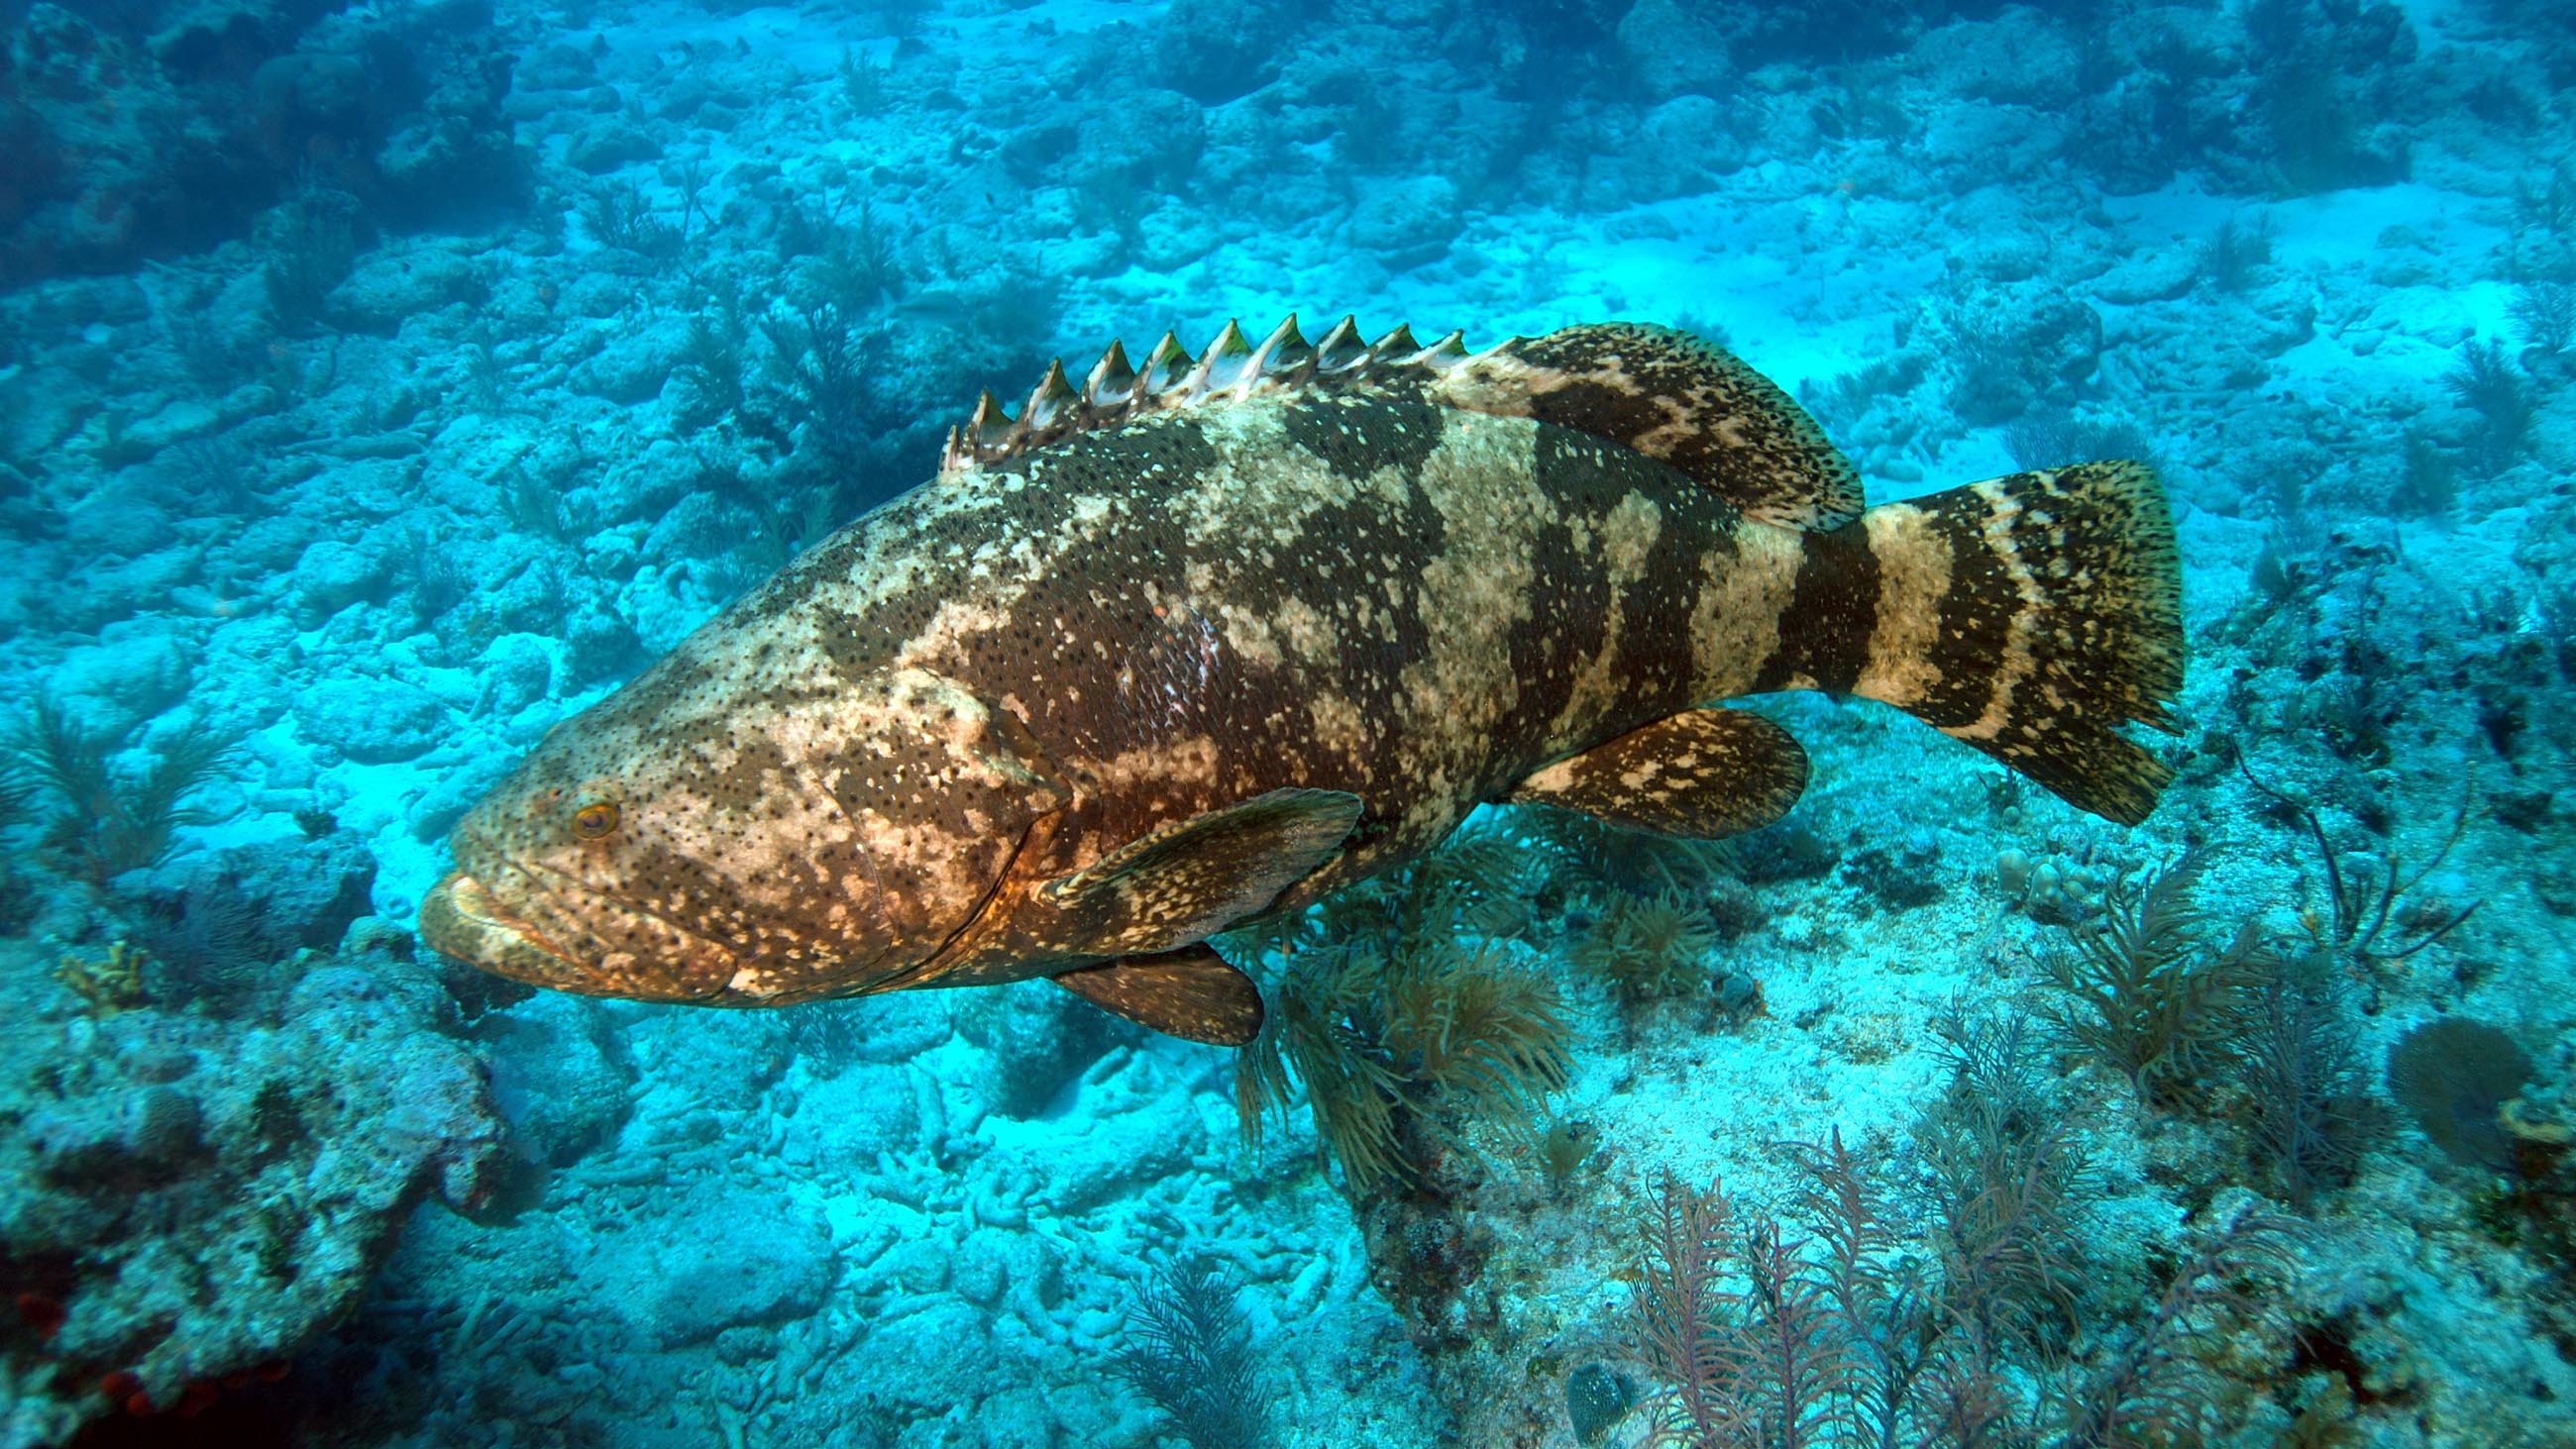 Scientists warn that unbridled farming could spell disaster for Cuba's coral reefs — and rare species like the goliath grouper.